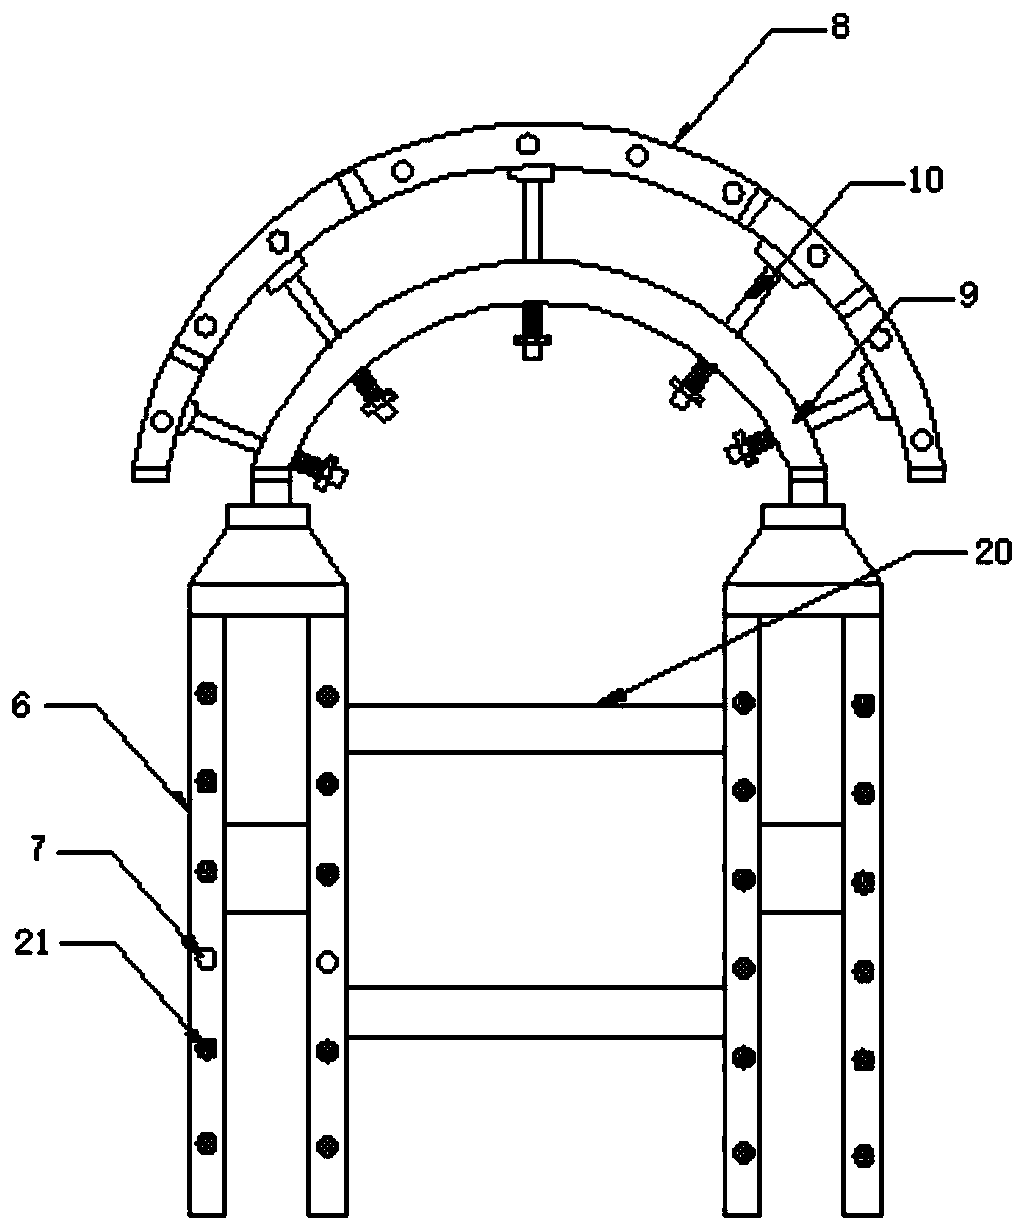 Variable cross section tunnel excavation construction method based on climbing pilot tunnel